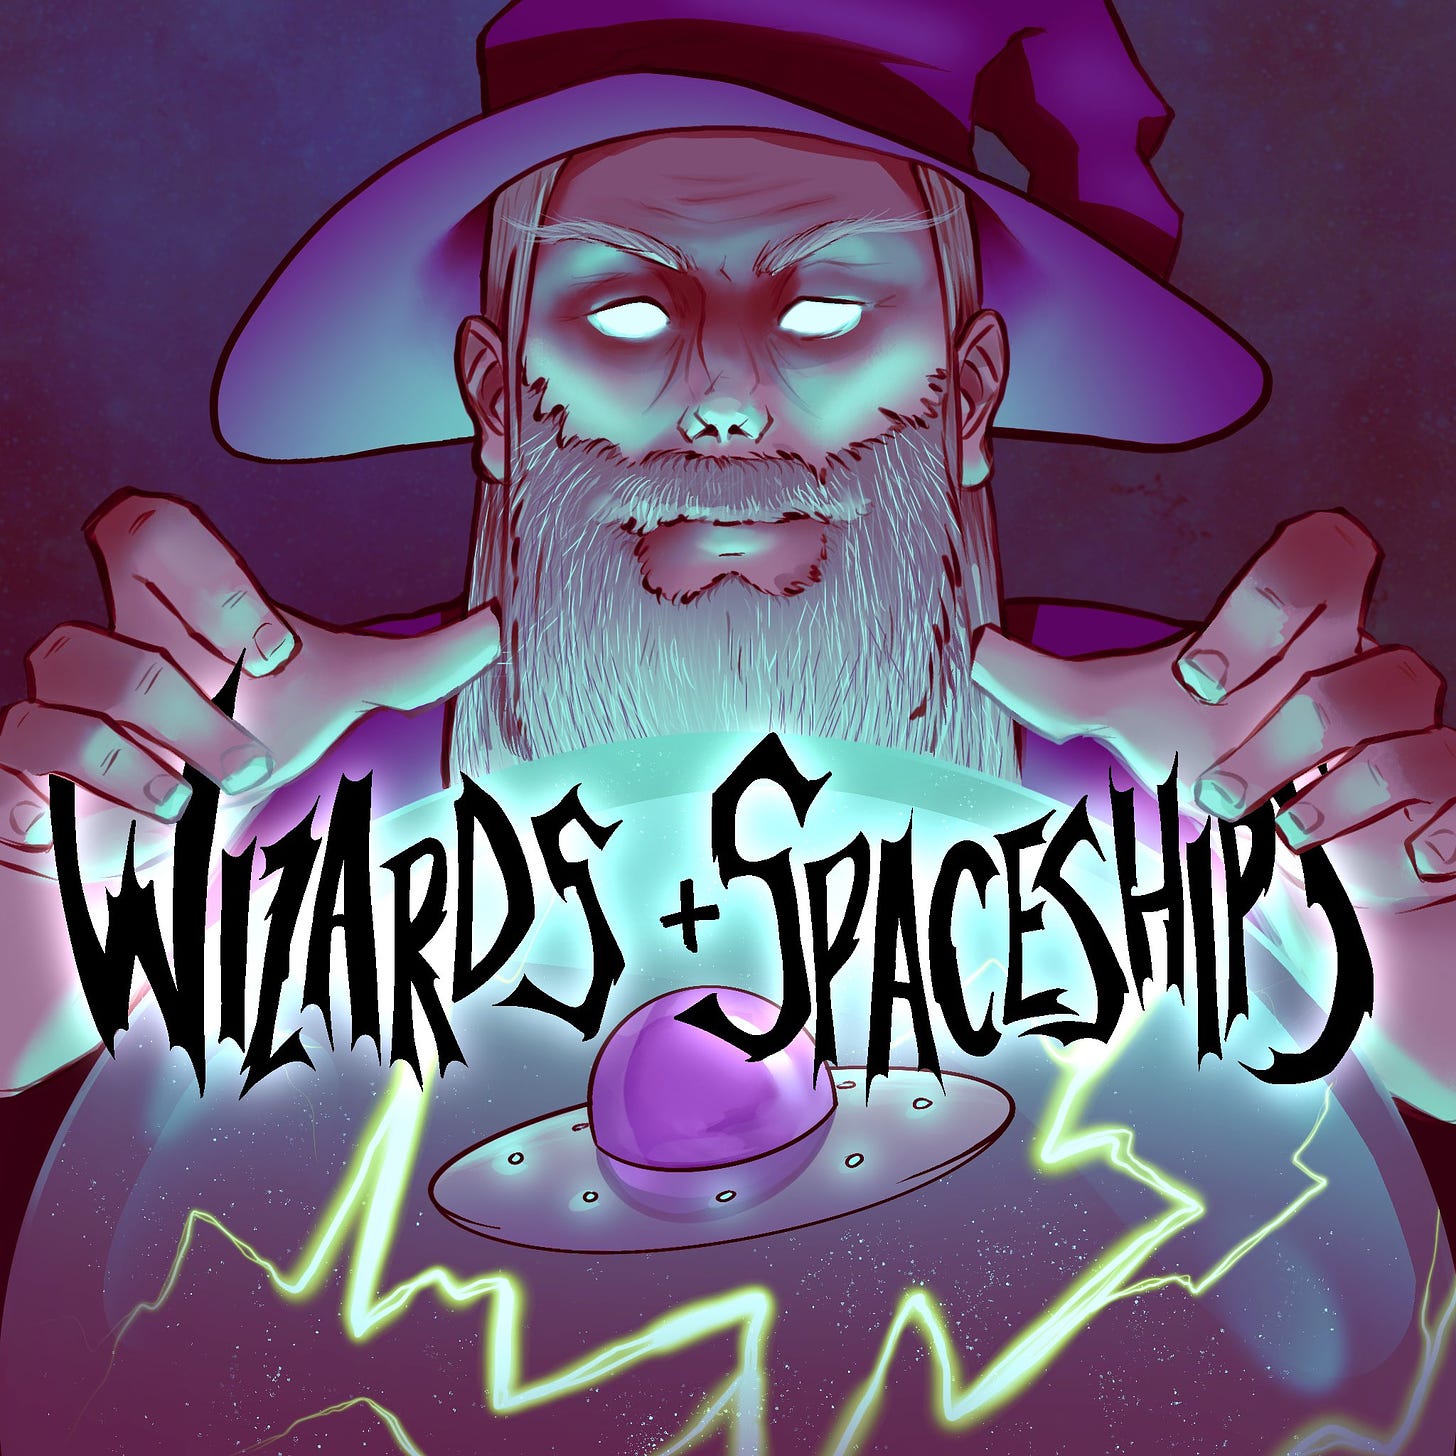 The wizards and spaceships logo, featuring an extremely metal looking wizard casting lightning on a ufo that's in an orb. It's sick af.